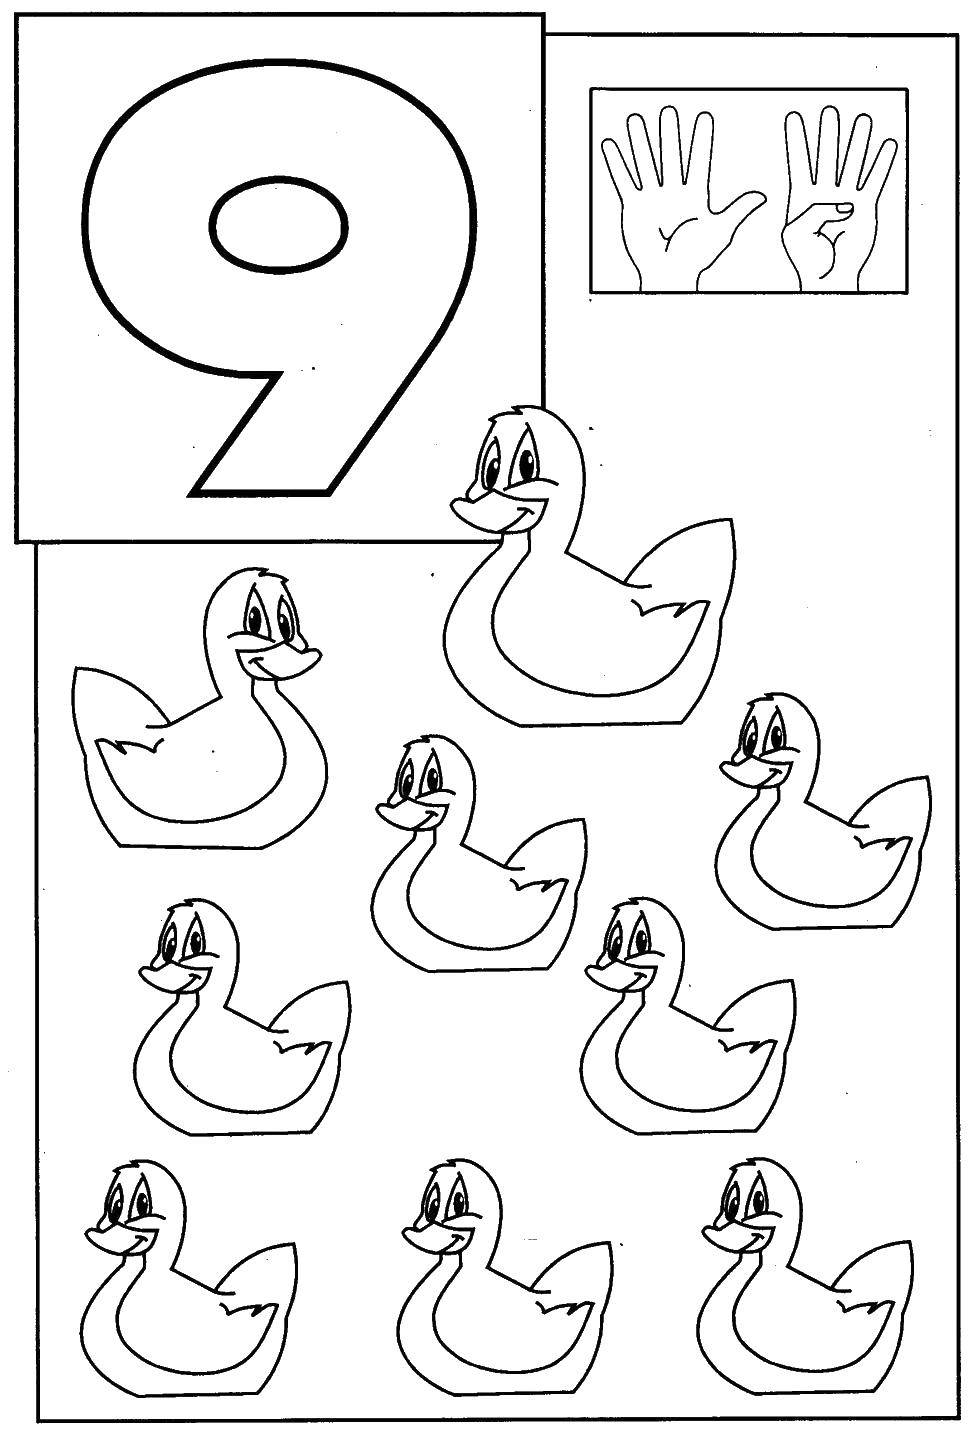 Coloring 9 ducklings. Category Learn to count. Tags:  Numbers , account numbers.